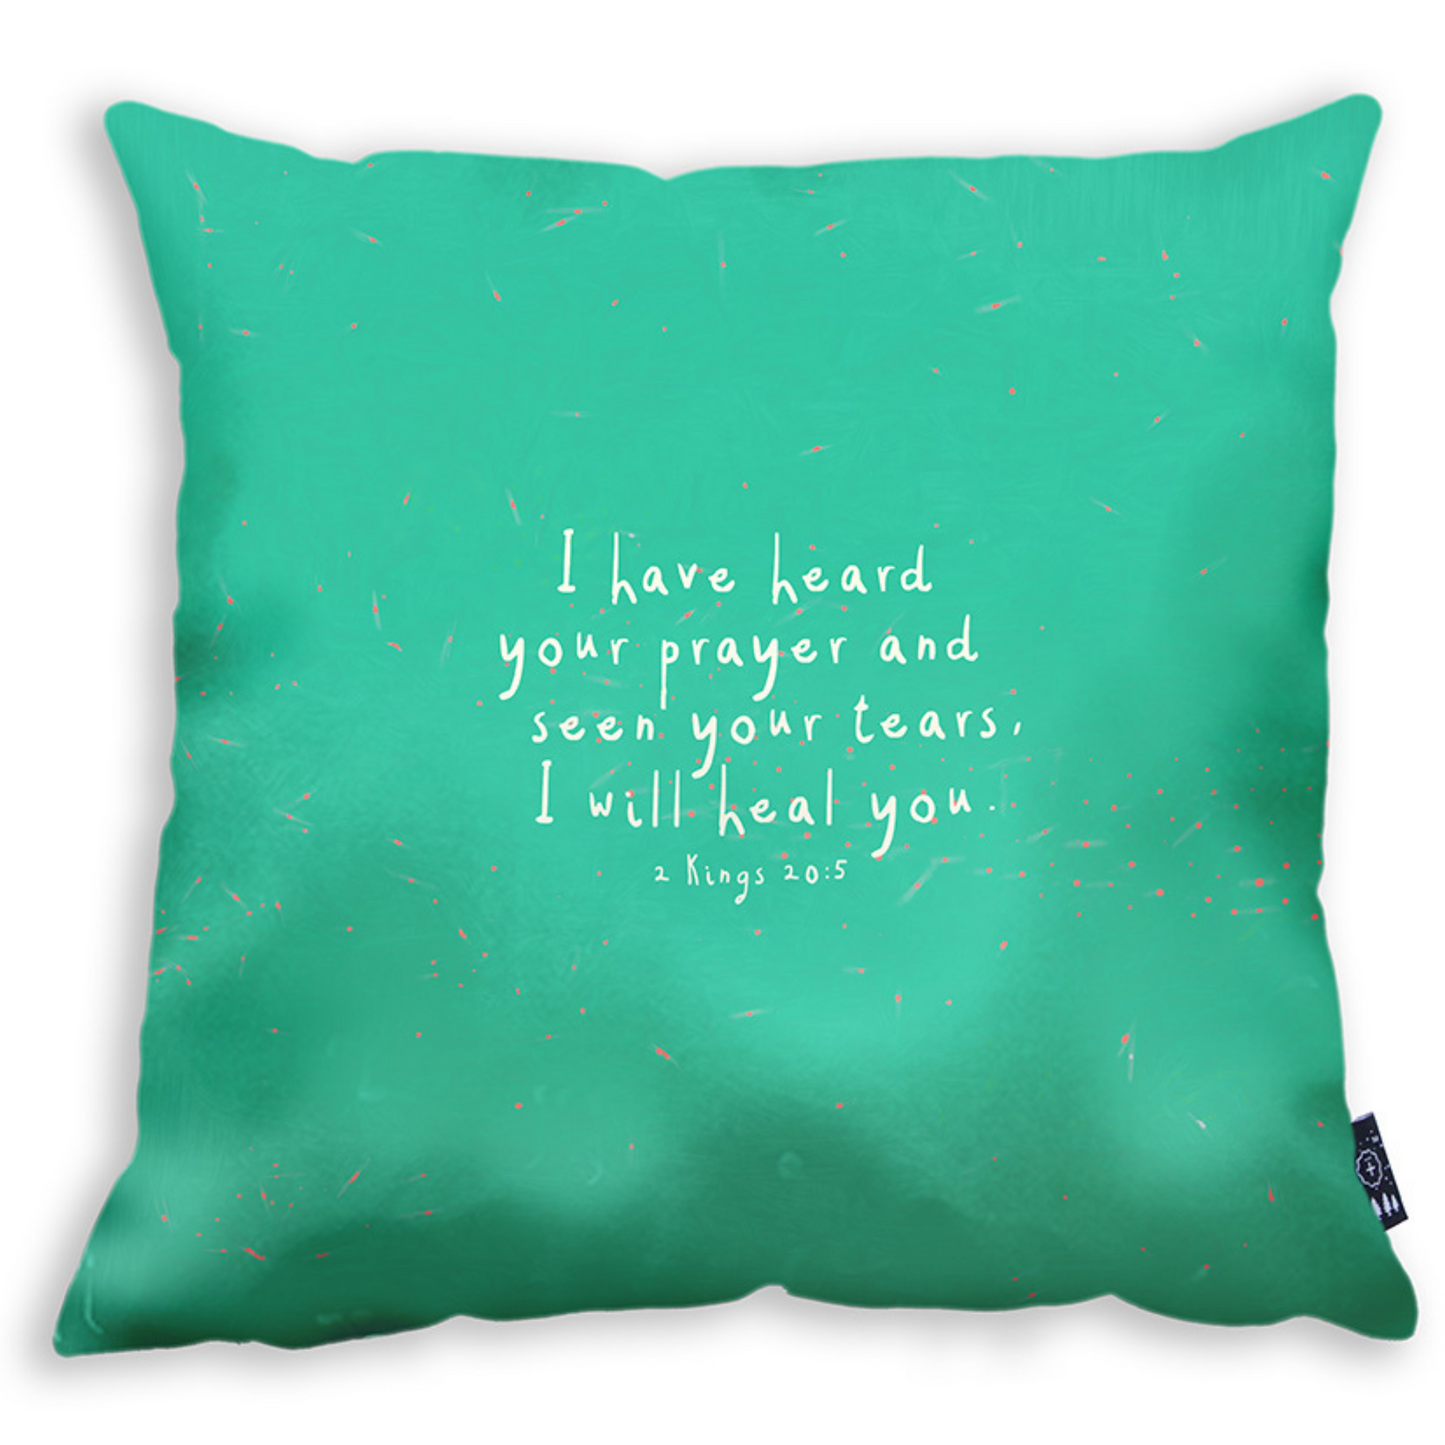 I Will Heal You - Cushion Cover